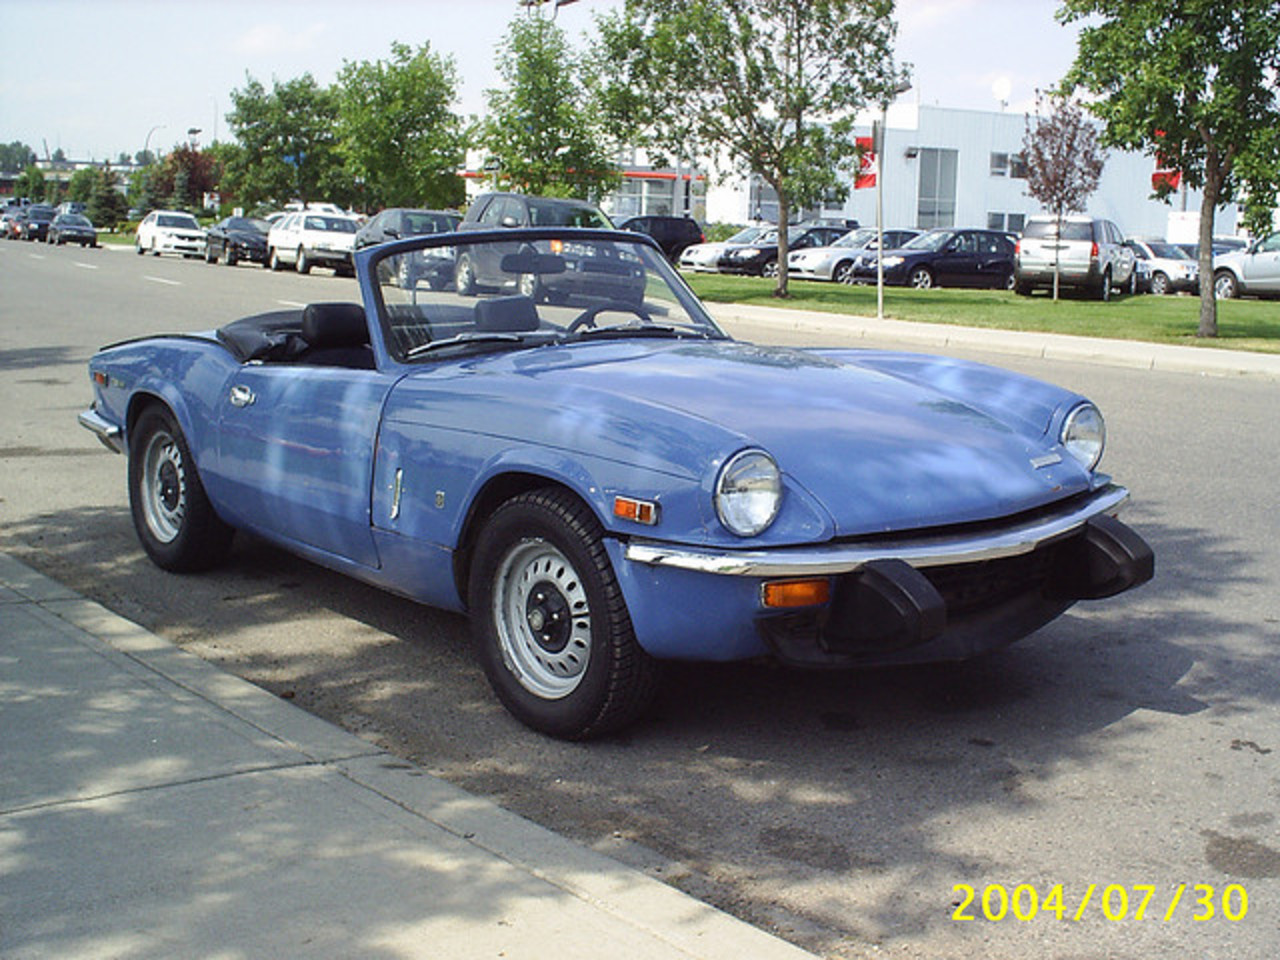 My ExCars 1974 Triumph Spitfire 1500 | Flickr - Photo Sharing!